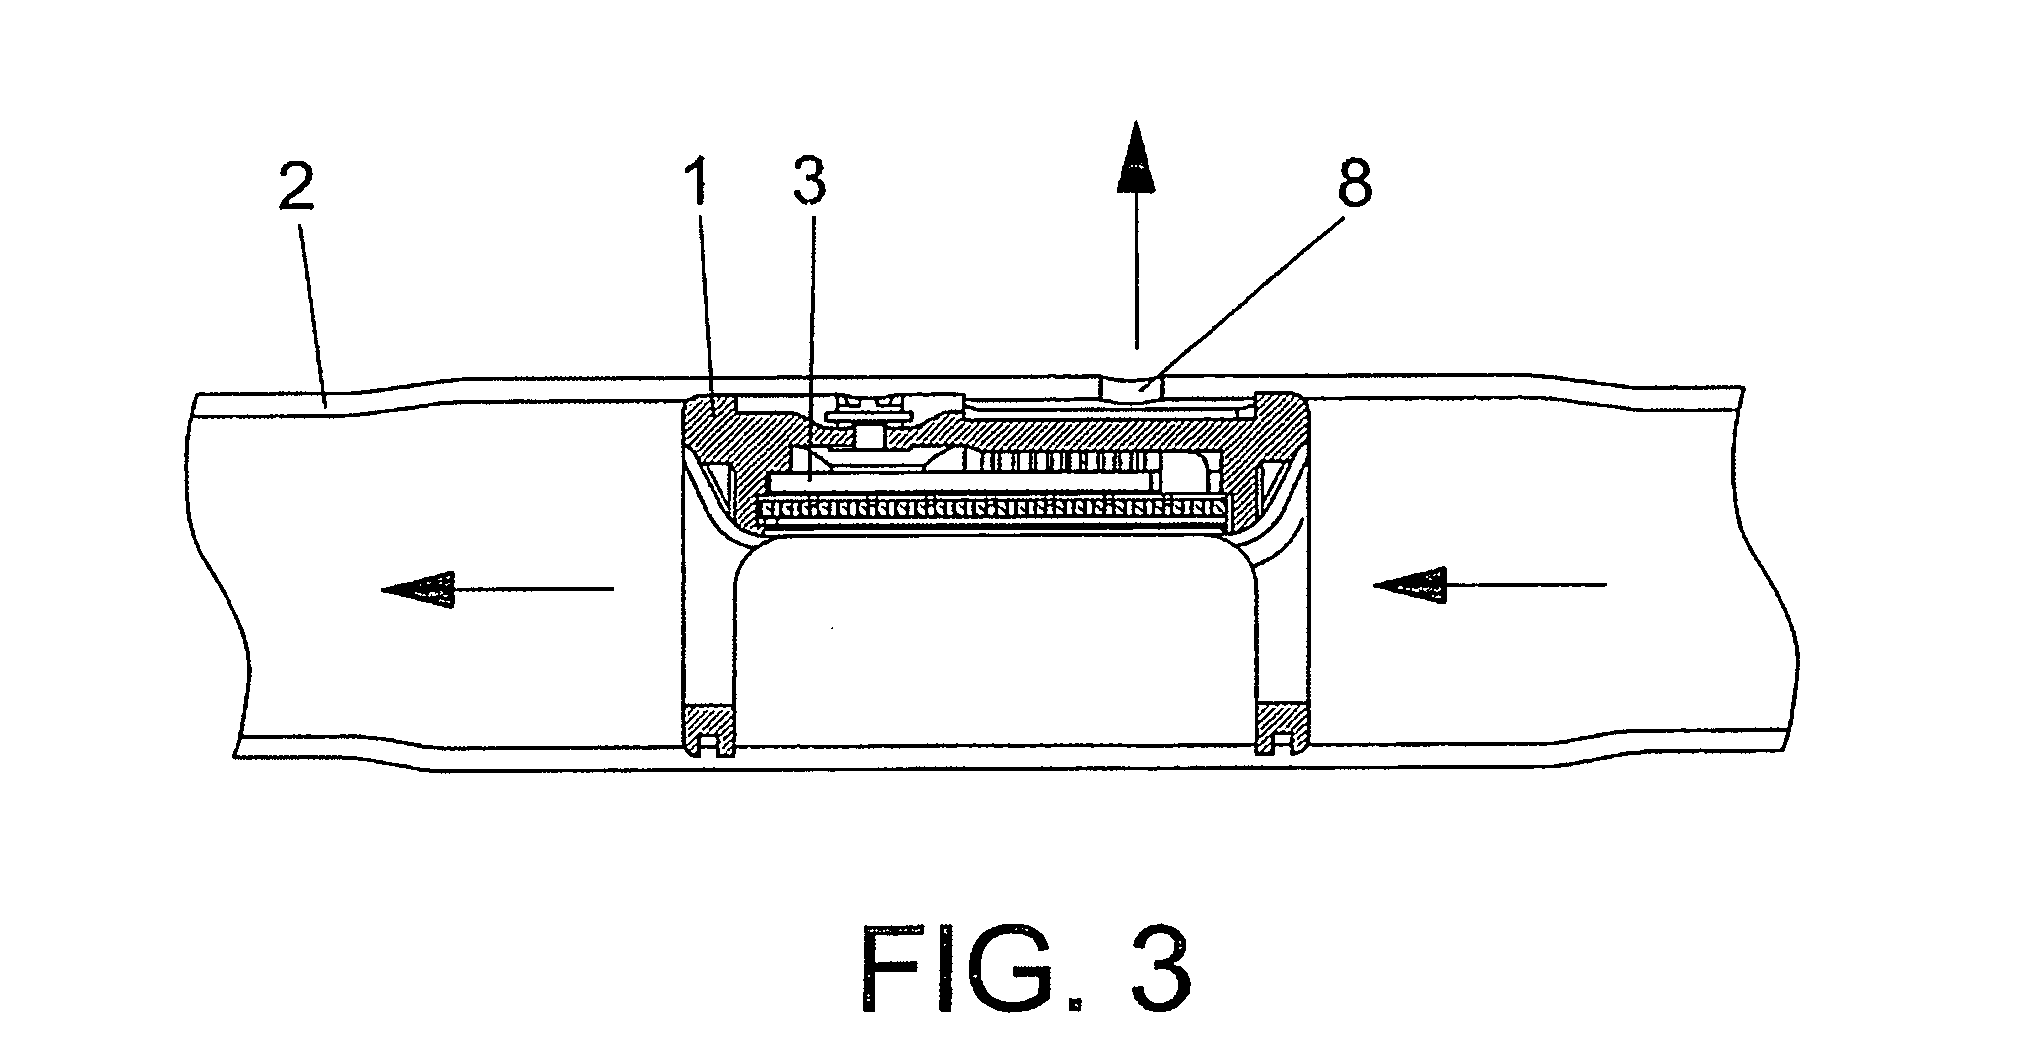 Self-compensating drip irrigation emitter, comprising a unidirectional flow device